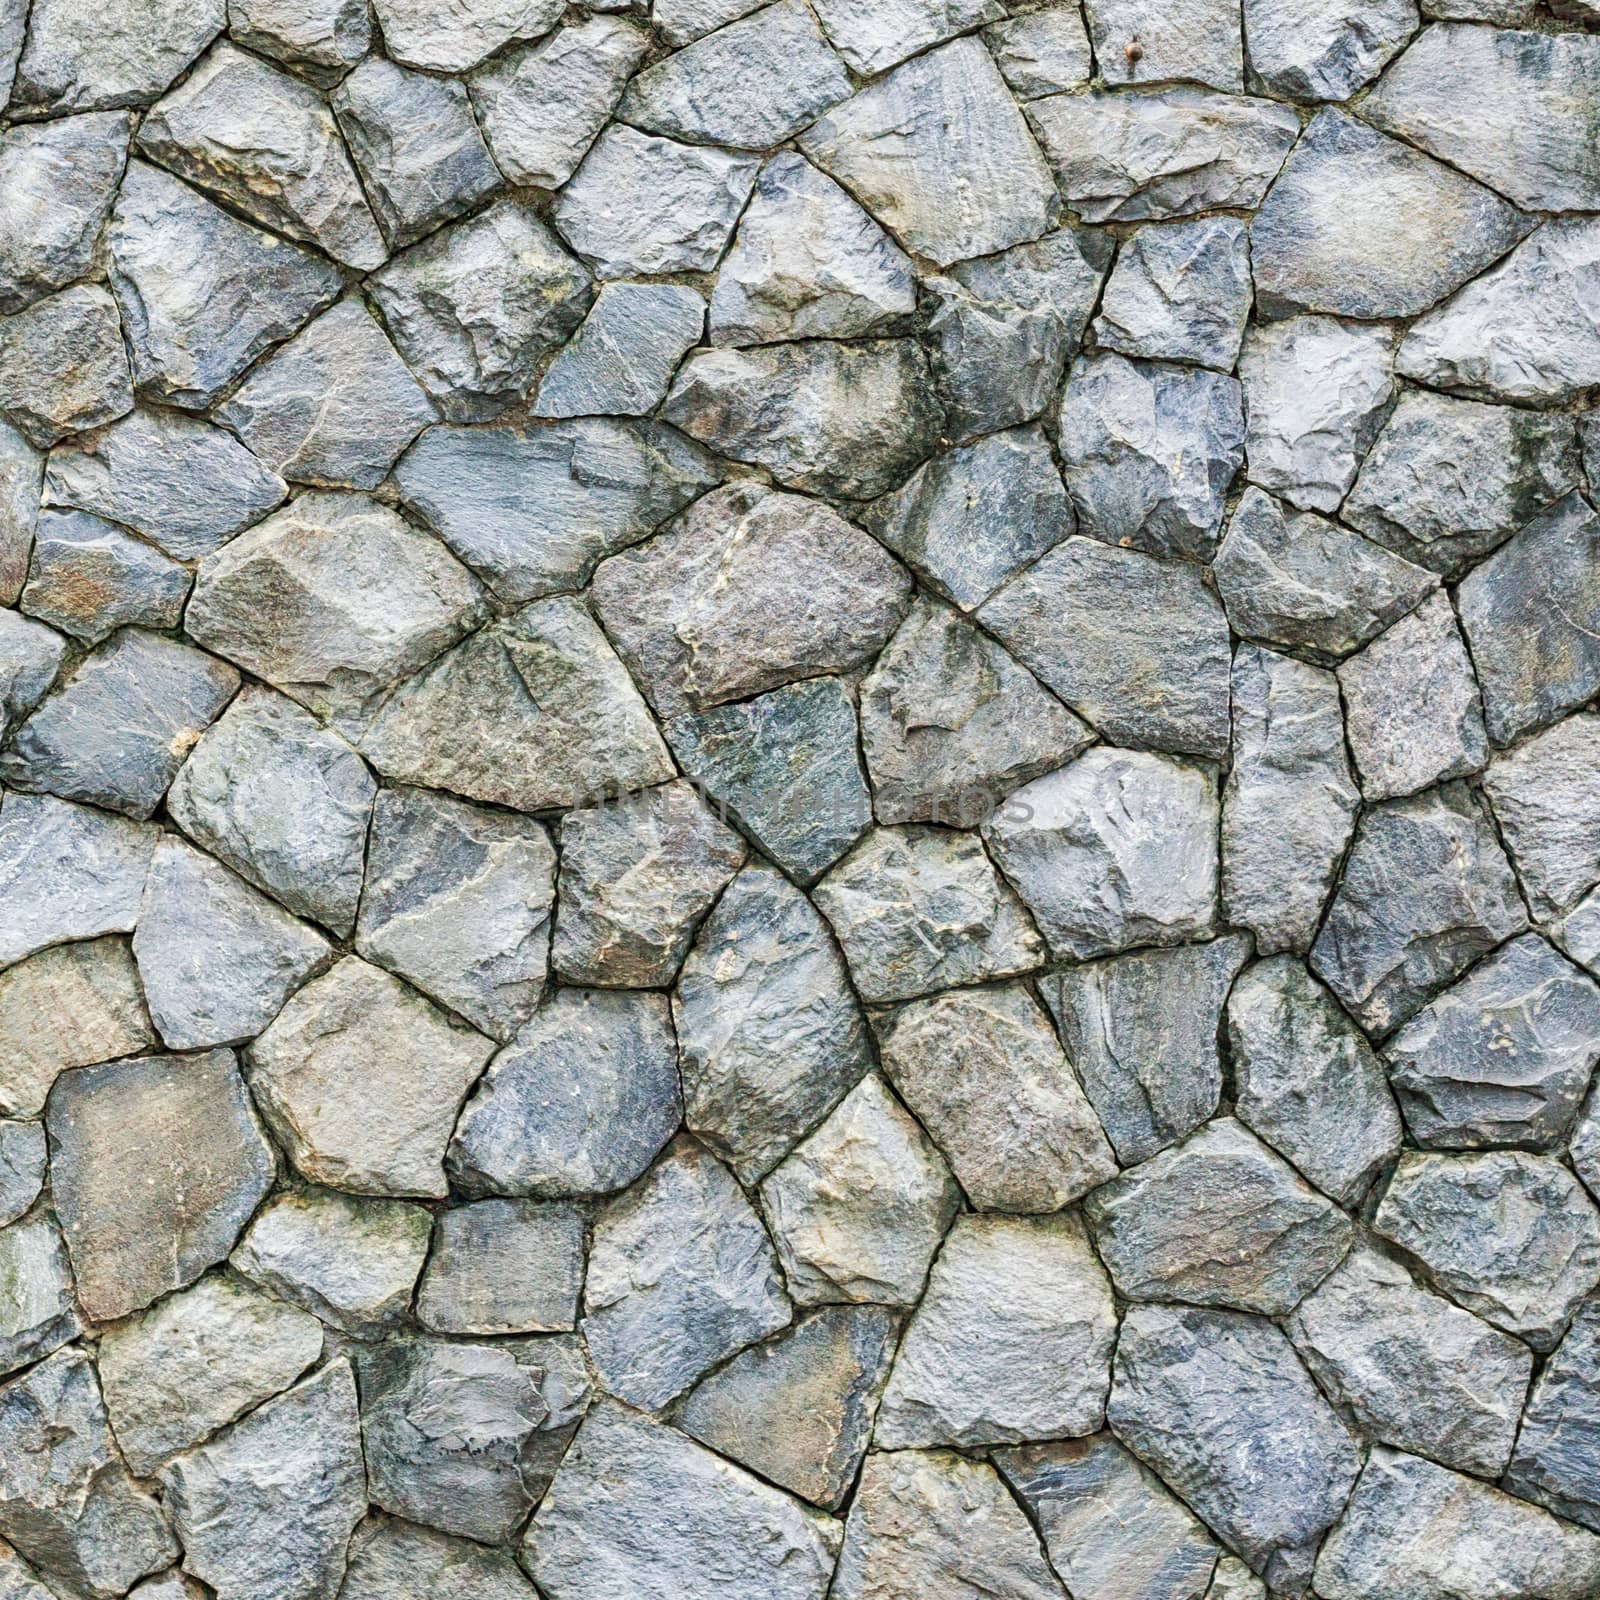 Stone wall. Texture of different forms stones similar to wall.